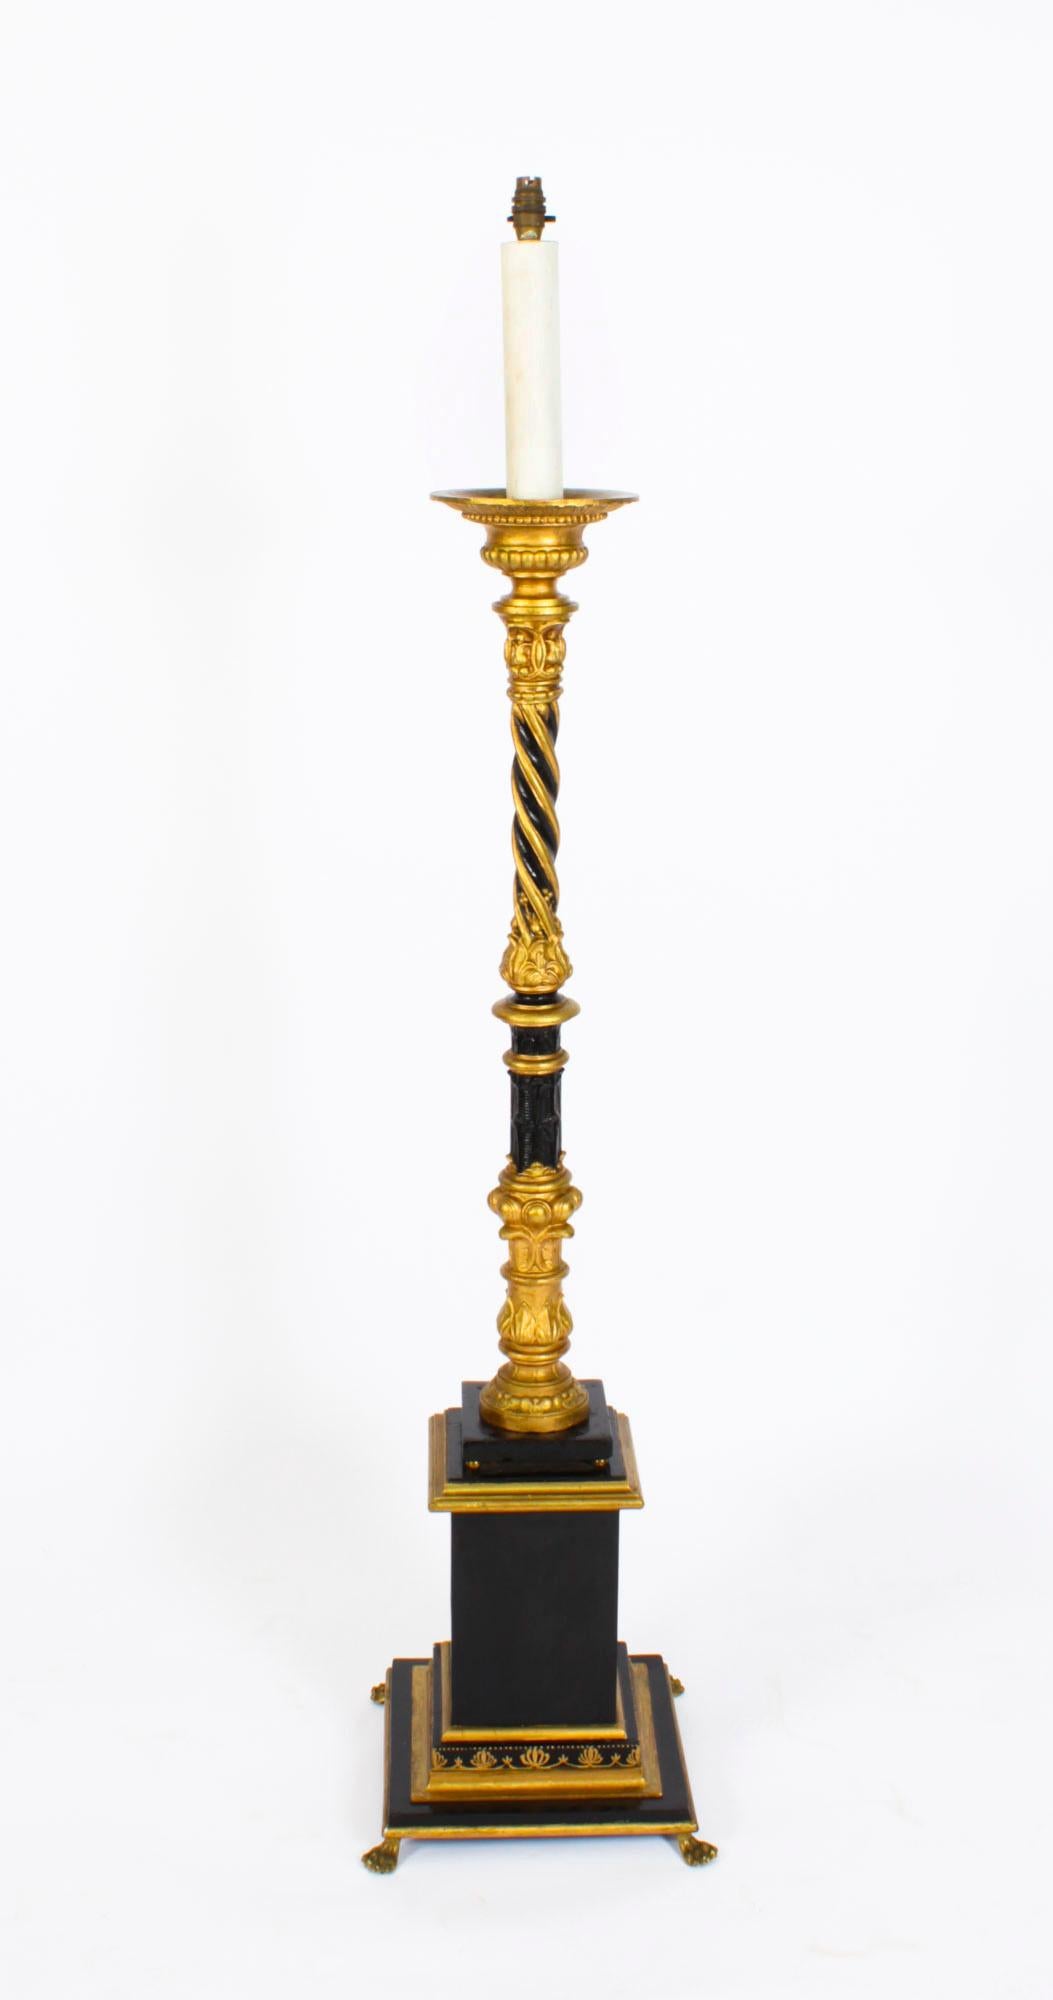 This is a highly attractive antique classical column design ormolu floor standard lamp now converted to electricity, circa 1890 in date.
 
This splendid lamp features a distinguished cylindrical ebonised and gilded spiral reeded column rising from